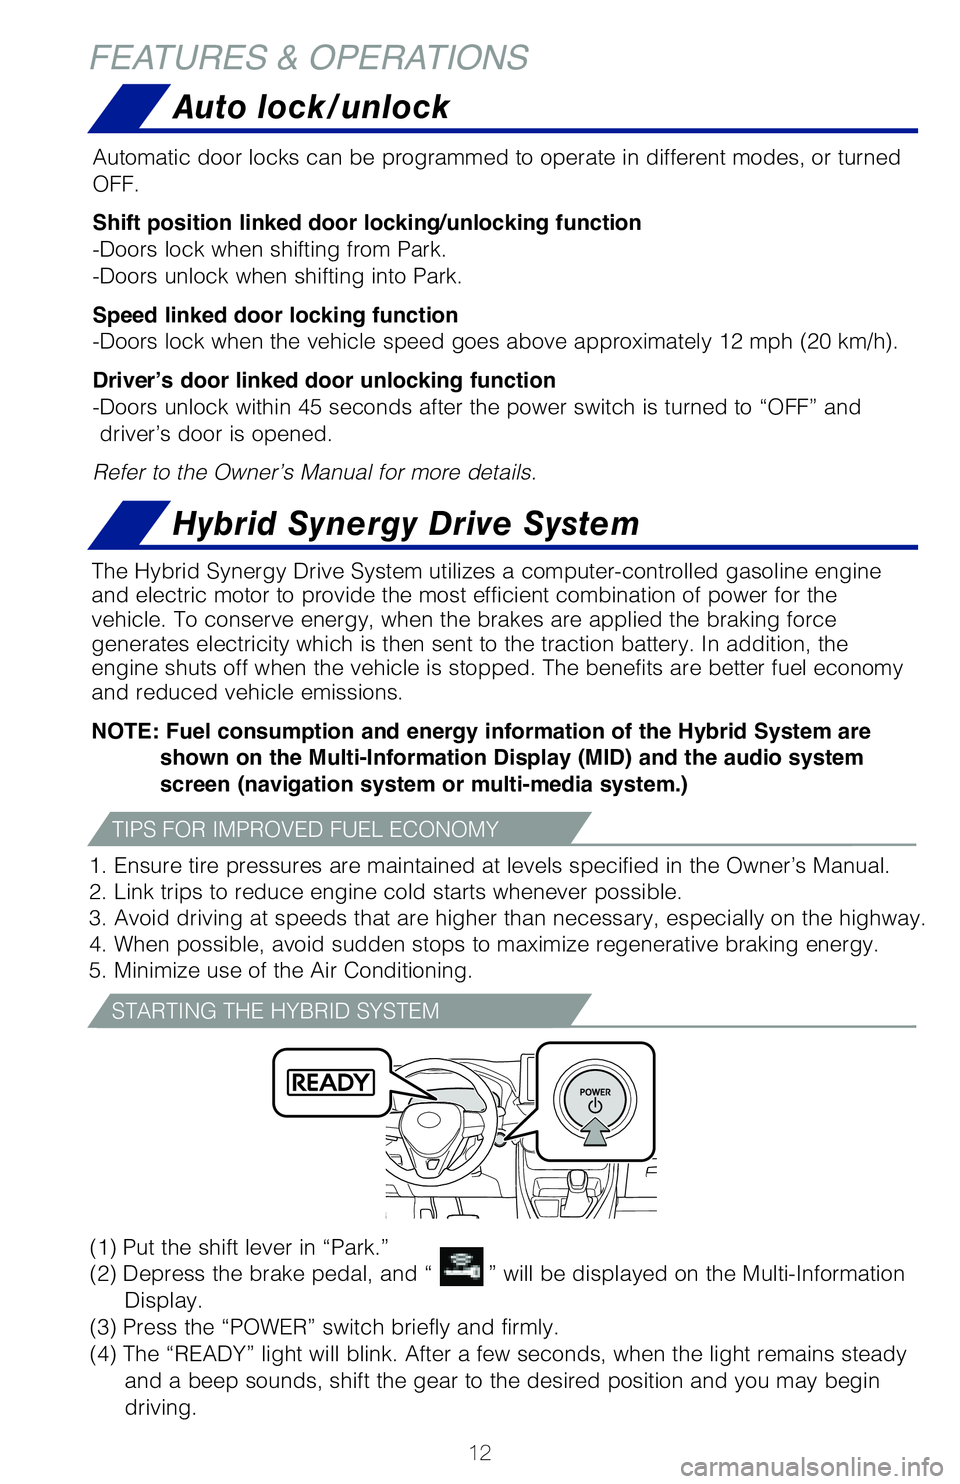 TOYOTA RAV4 HYBRID 2020  Owners Manual (in English) 12
Hybrid Synergy Drive System
The Hybrid Synergy Drive System utilizes a computer-controlled gasoline \
engine 
and electric motor to provide the most efficient combination of power fo\
r the 
vehicl